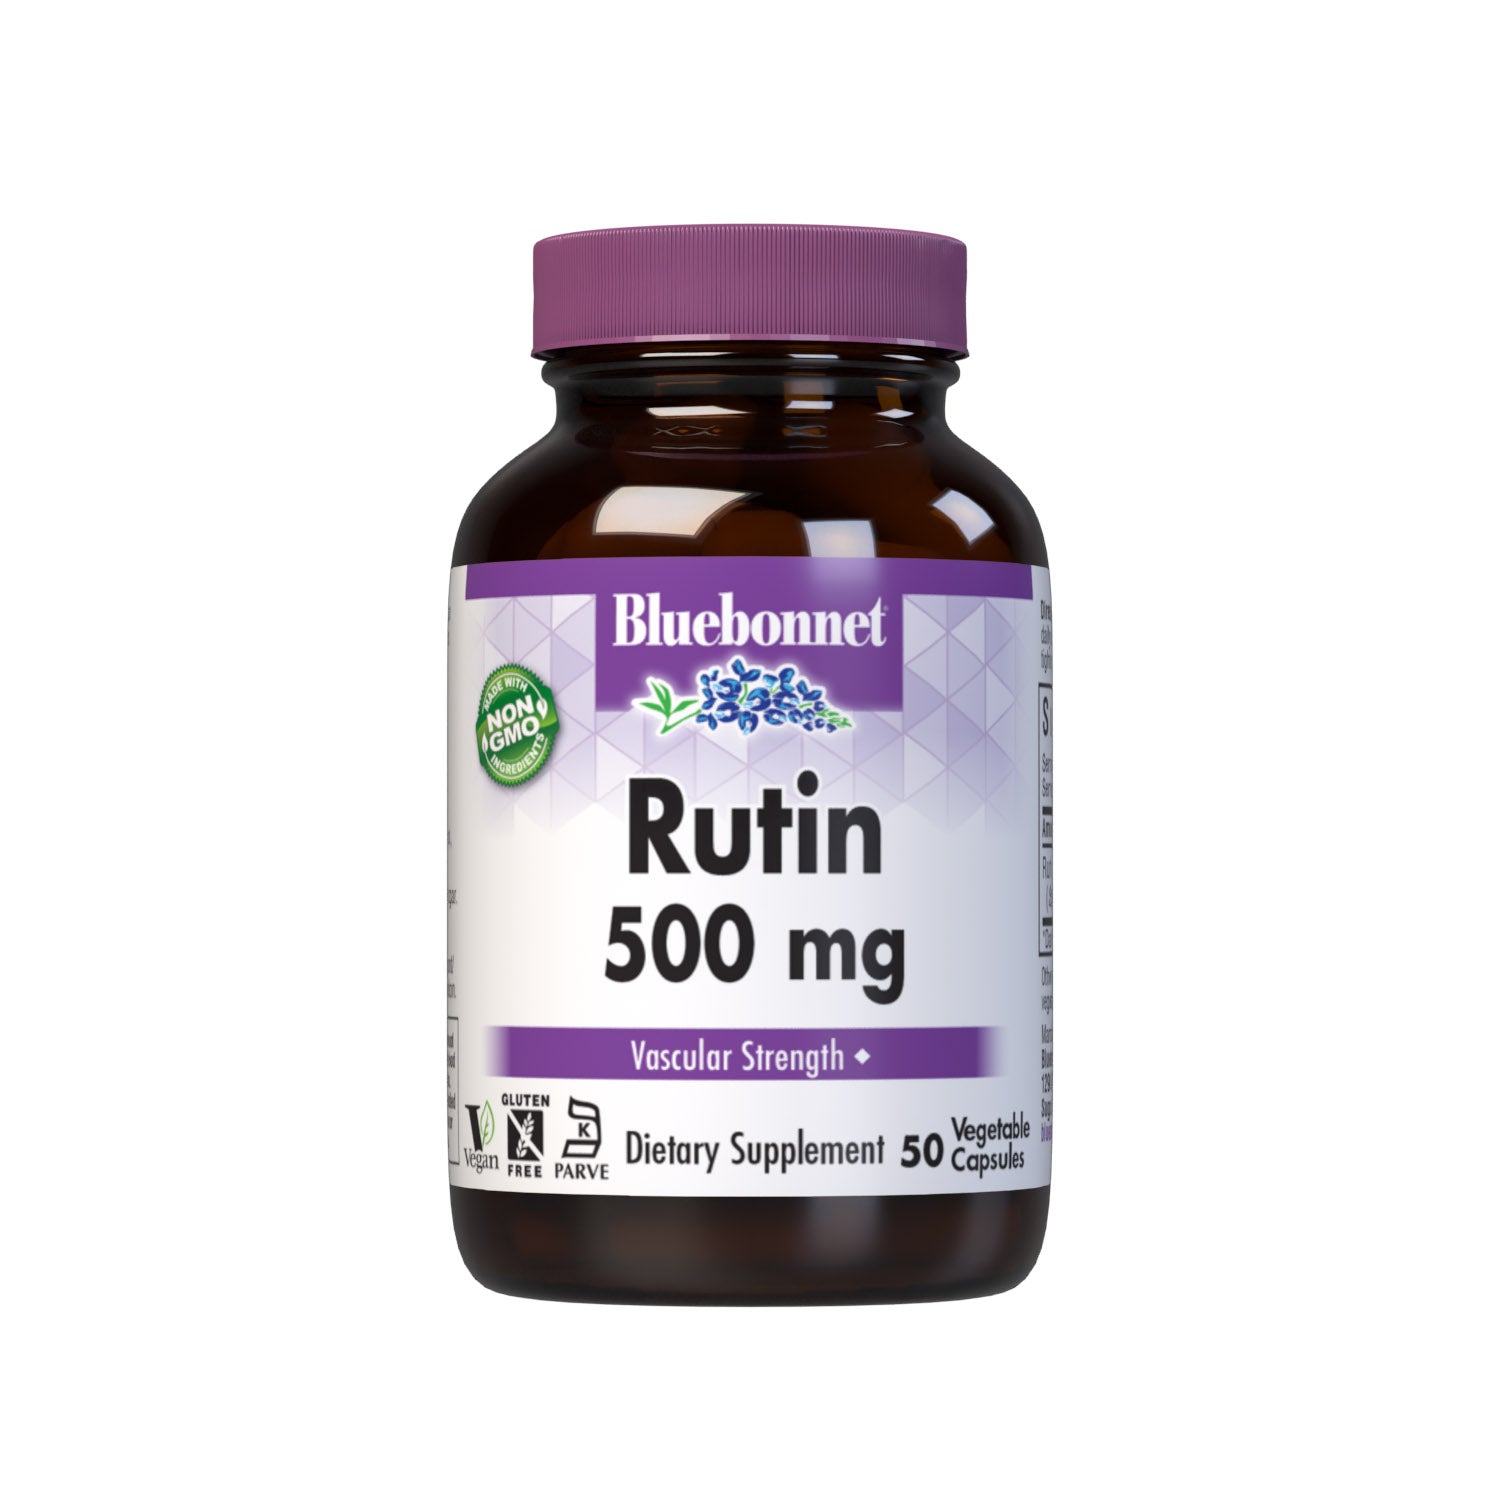 Bluebonnet’s Rutin 500 mg 50 Vegetable Capsules are formulated with rutin, a bioflavonoid from Sophora japonica that may support vascular strength. #size_50 count